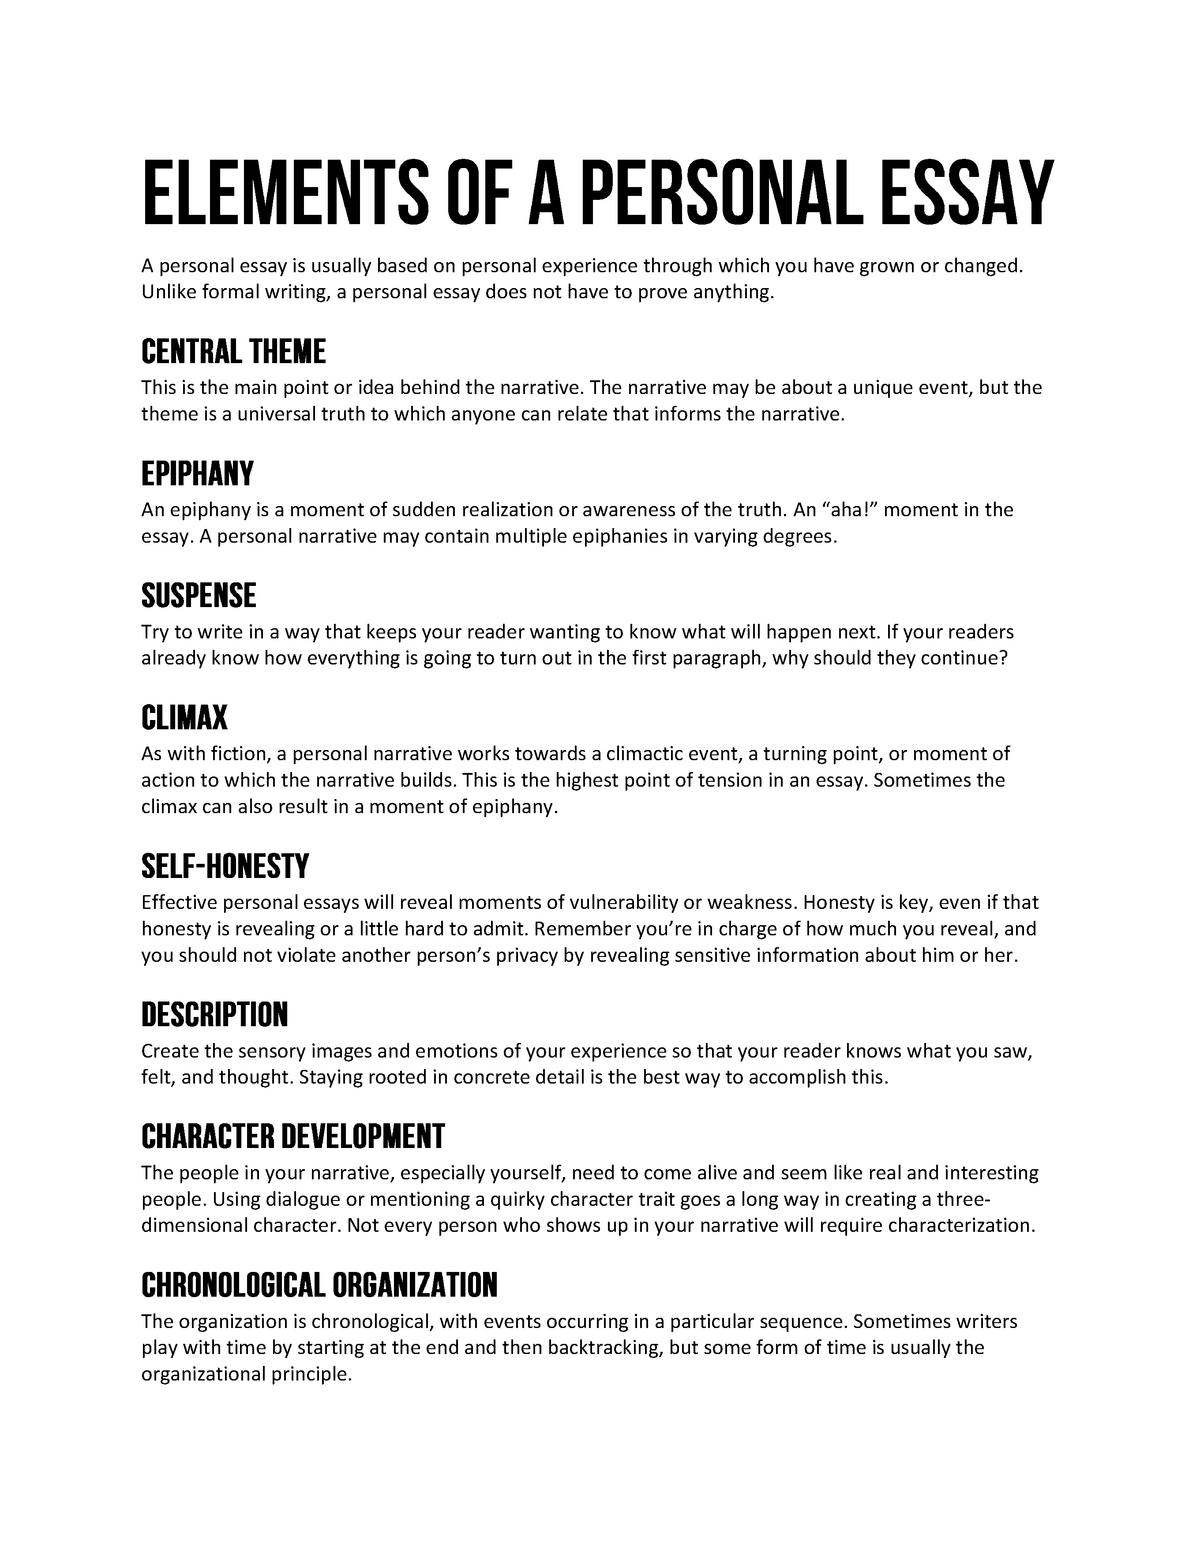 main elements of a personal essay